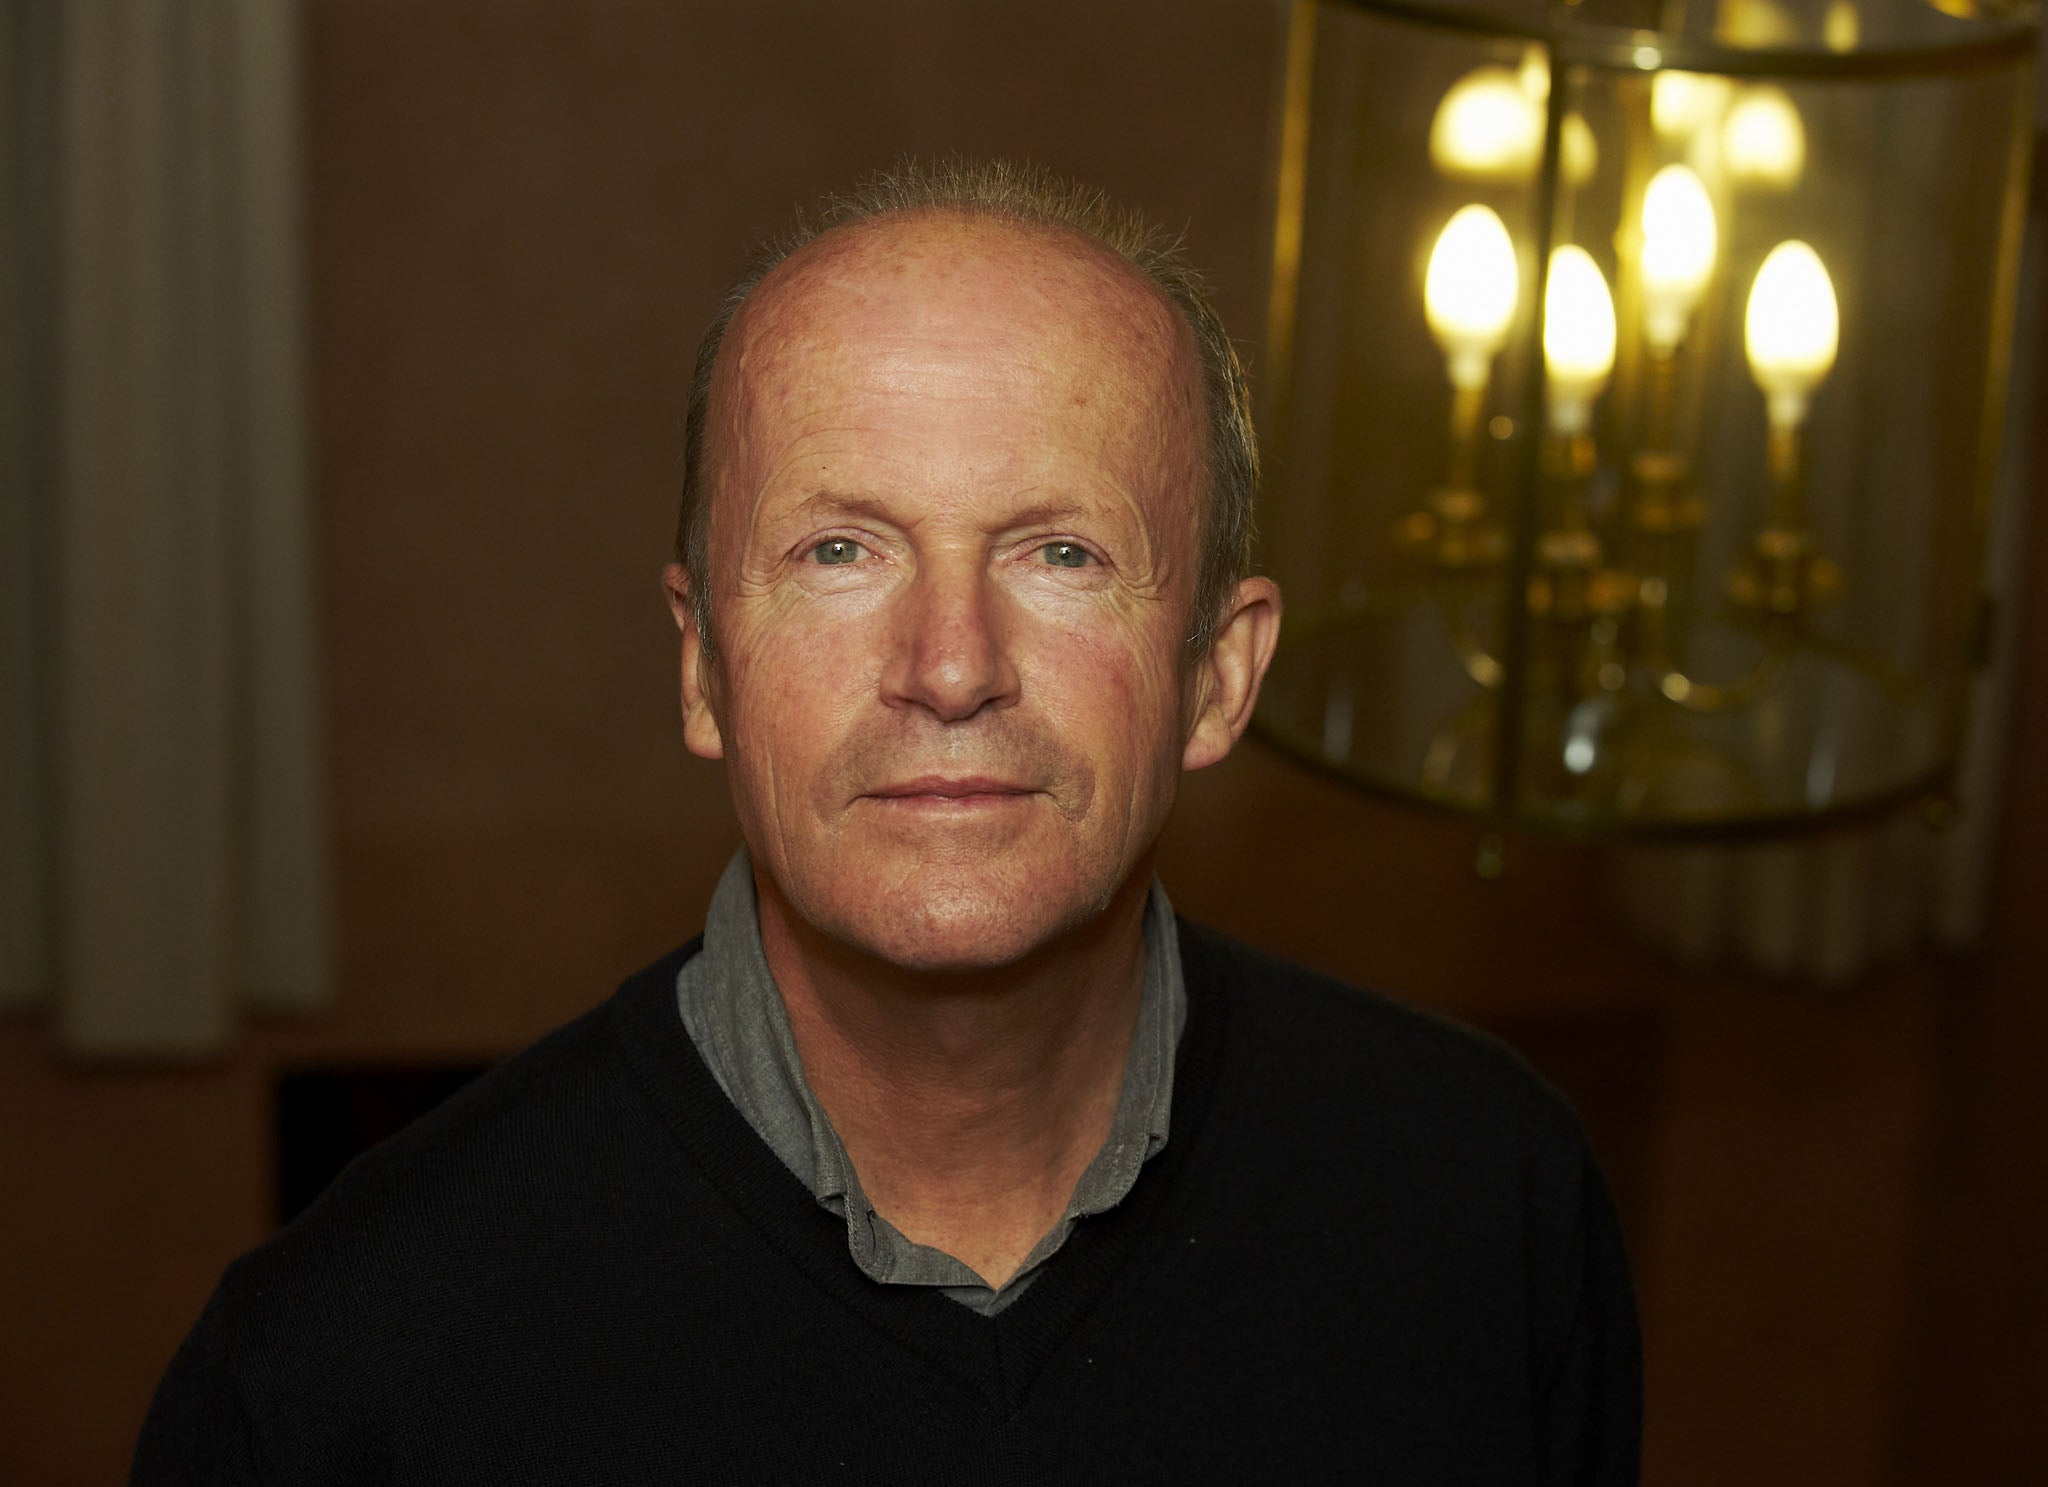 Jim Crace the only English novelist who has been shortlisted for the Man Booker this year